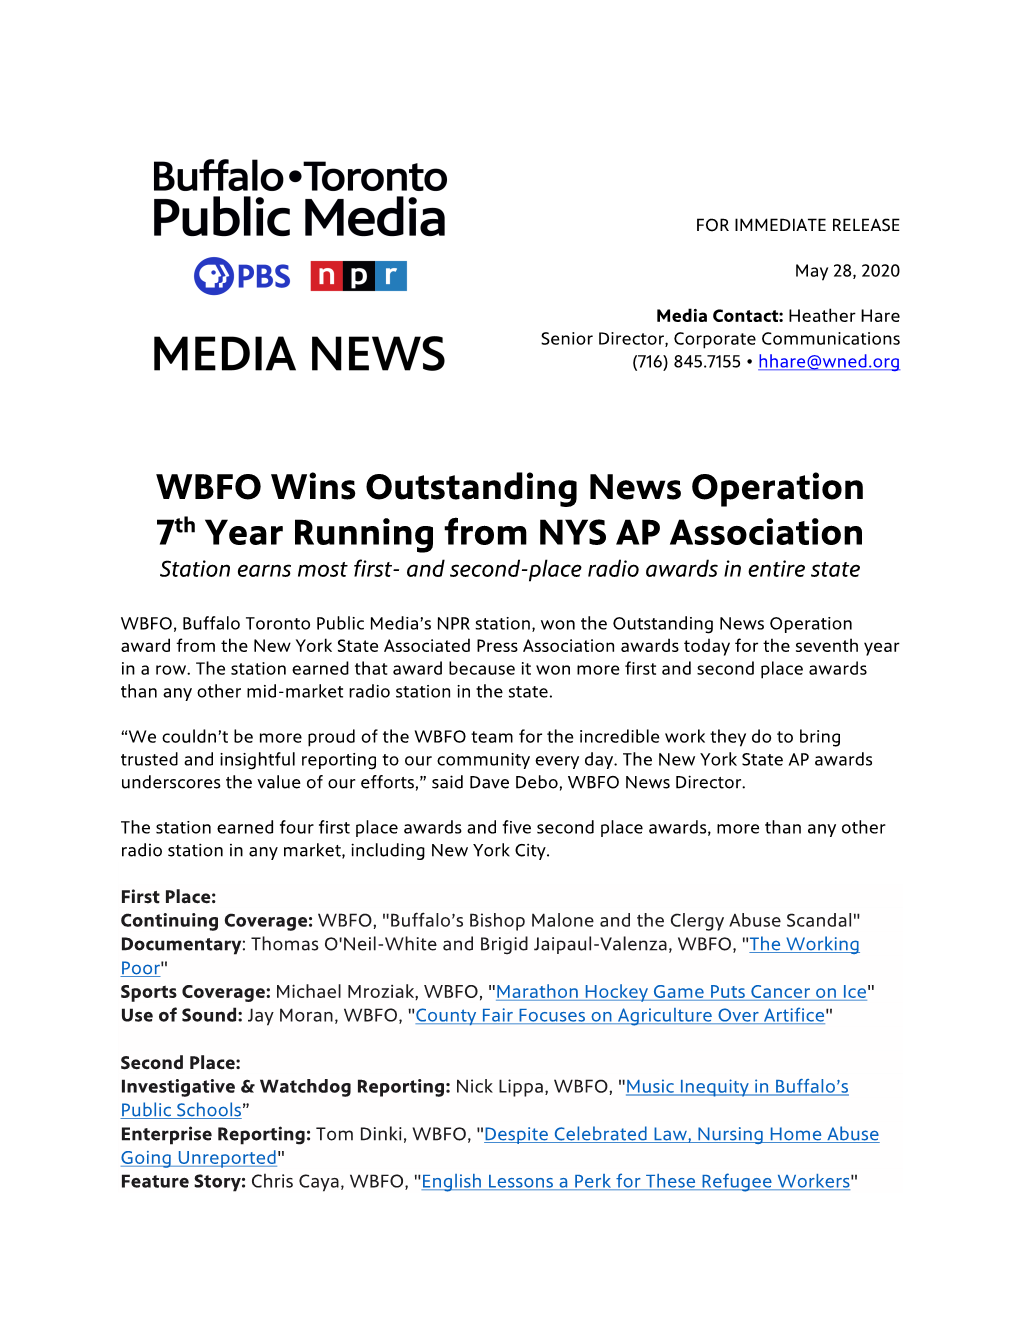 WBFO Wins Outstanding News Operation 7Th Year Running from NYS AP Association Station Earns Most First- and Second-Place Radio Awards in Entire State